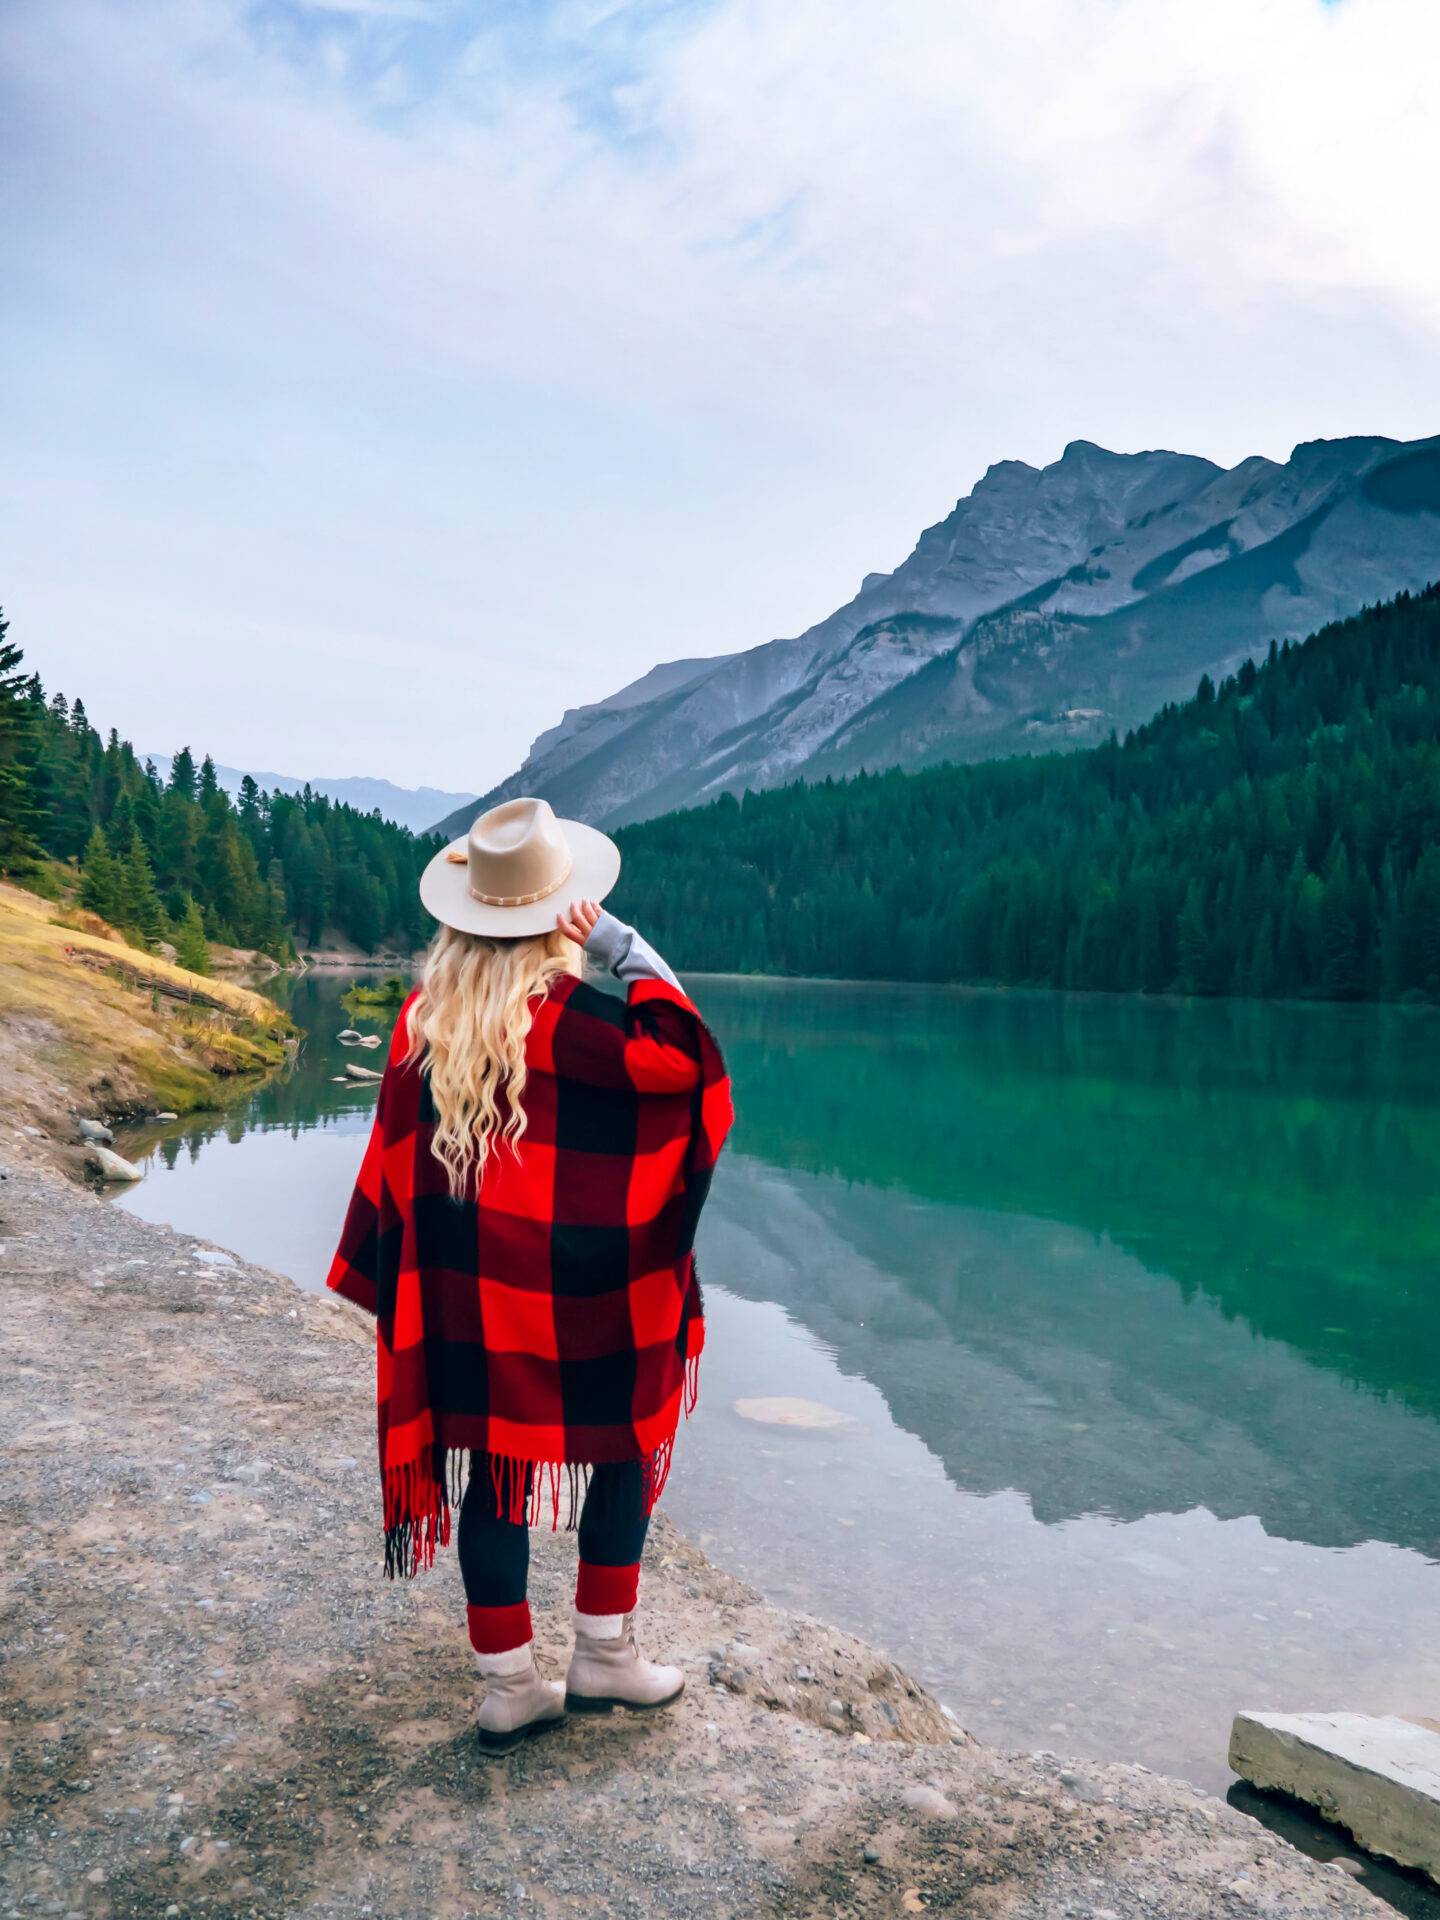 Visiting Banff National Park soon? Don't miss this guide of the 50 best things to in Banff for every kind of traveler! I recently spent 8 days exploring the area and took notes along the way so I could write you the most comprehensive guide possible. This guide includes all the top attractions, hikes, restaurants, and sights you definitely won't want to miss when you visit Banff National Park. I also include any tips you might need when visiting the area! Pictured here: Two Jack Lake